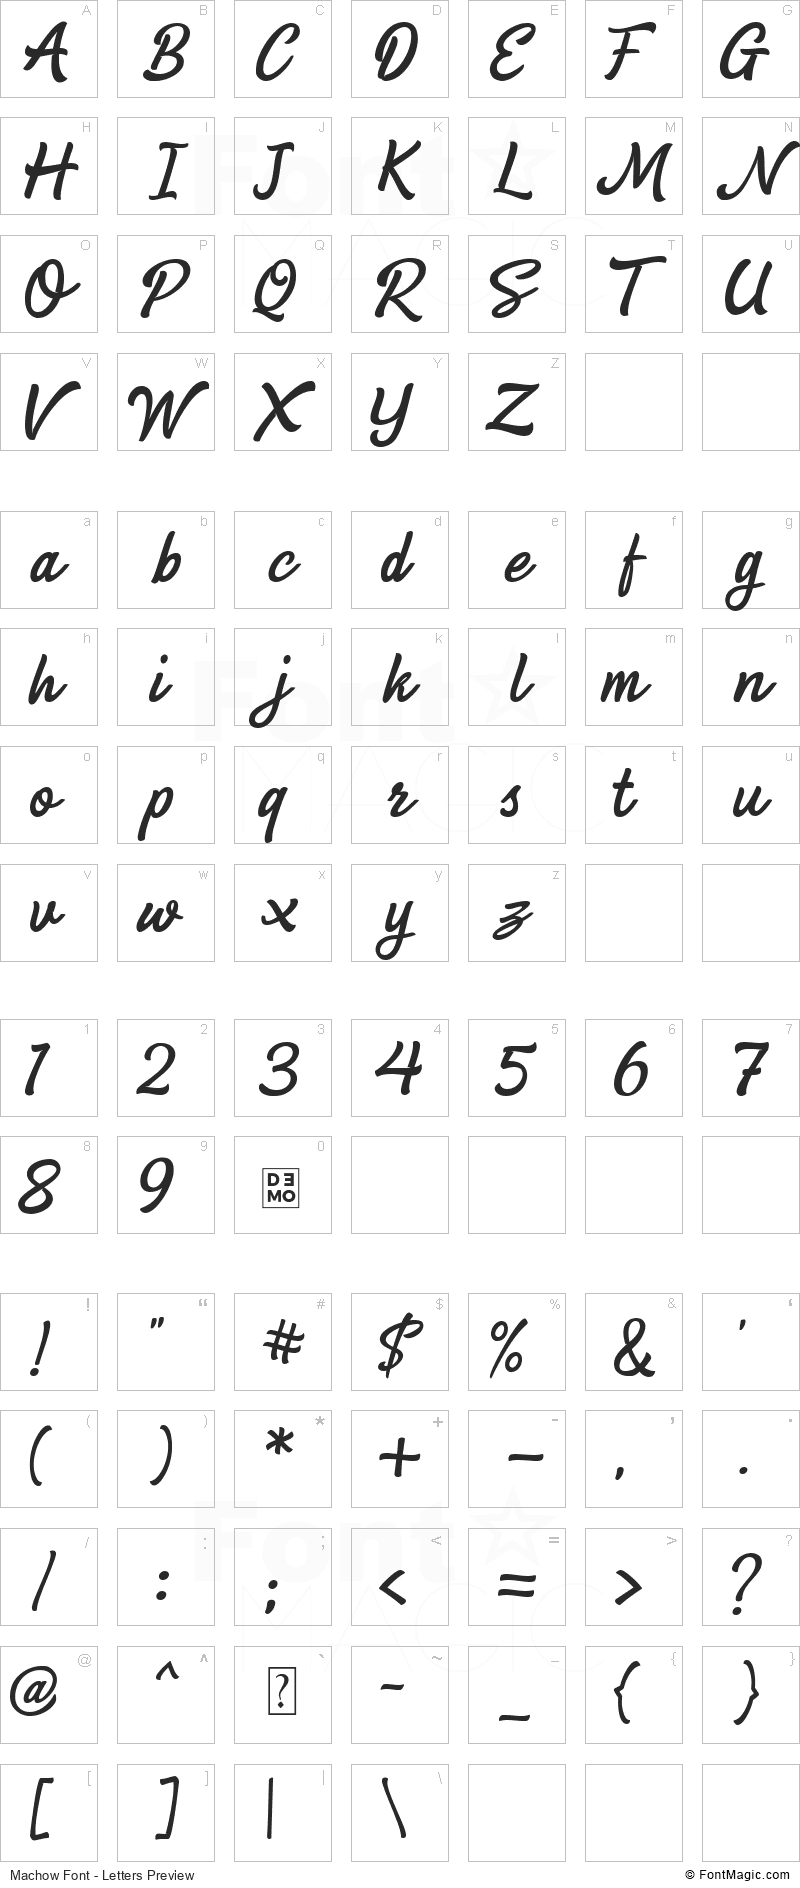 Machow Font - All Latters Preview Chart